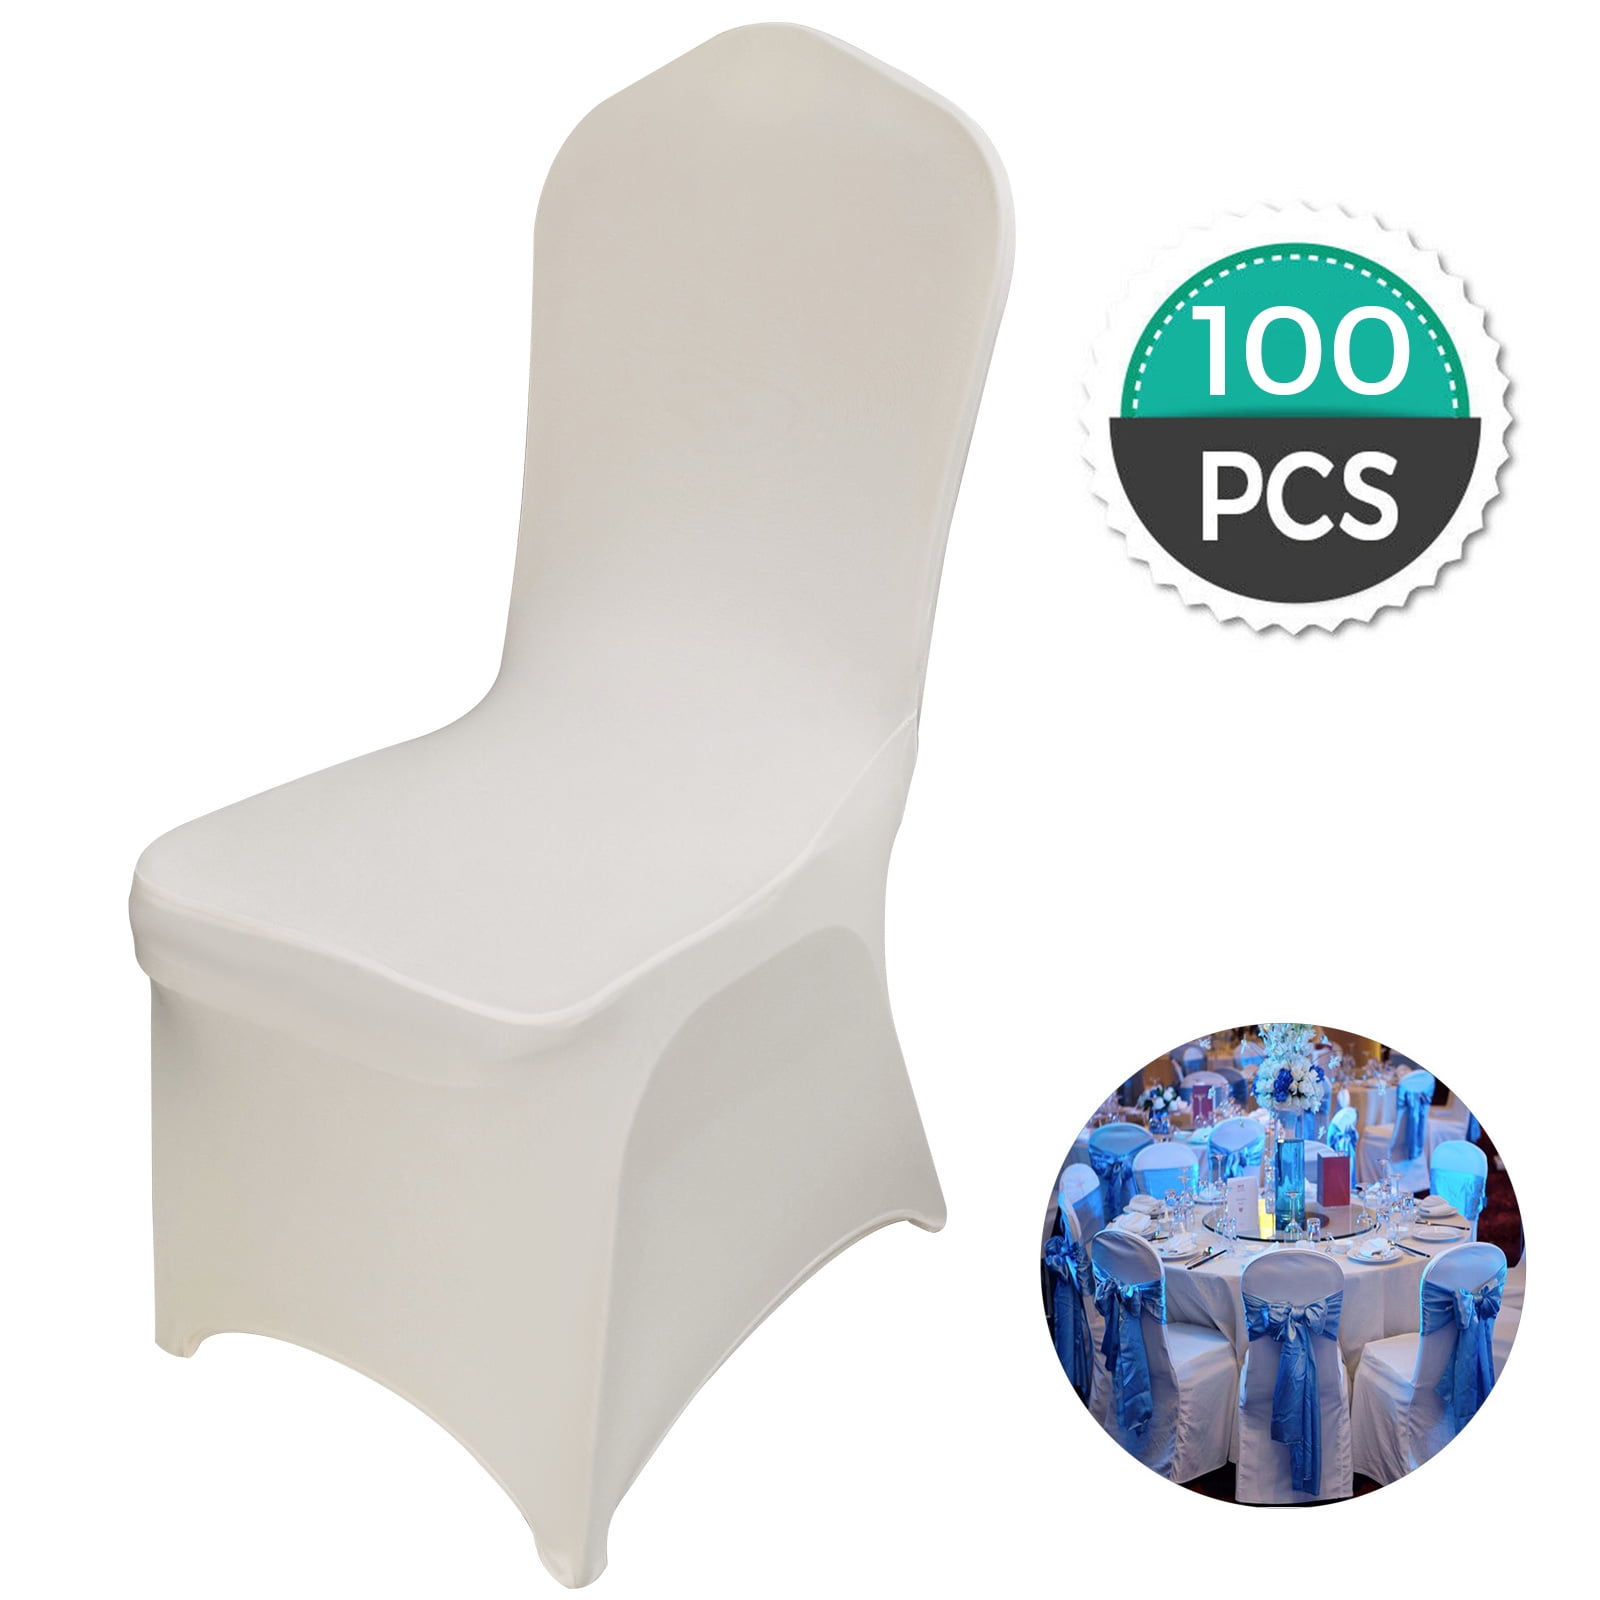 VEVORbrand 100 PCS Spandex Polyester Chair Cover for Wedding Party Dining  Banquet Chair, Ivory